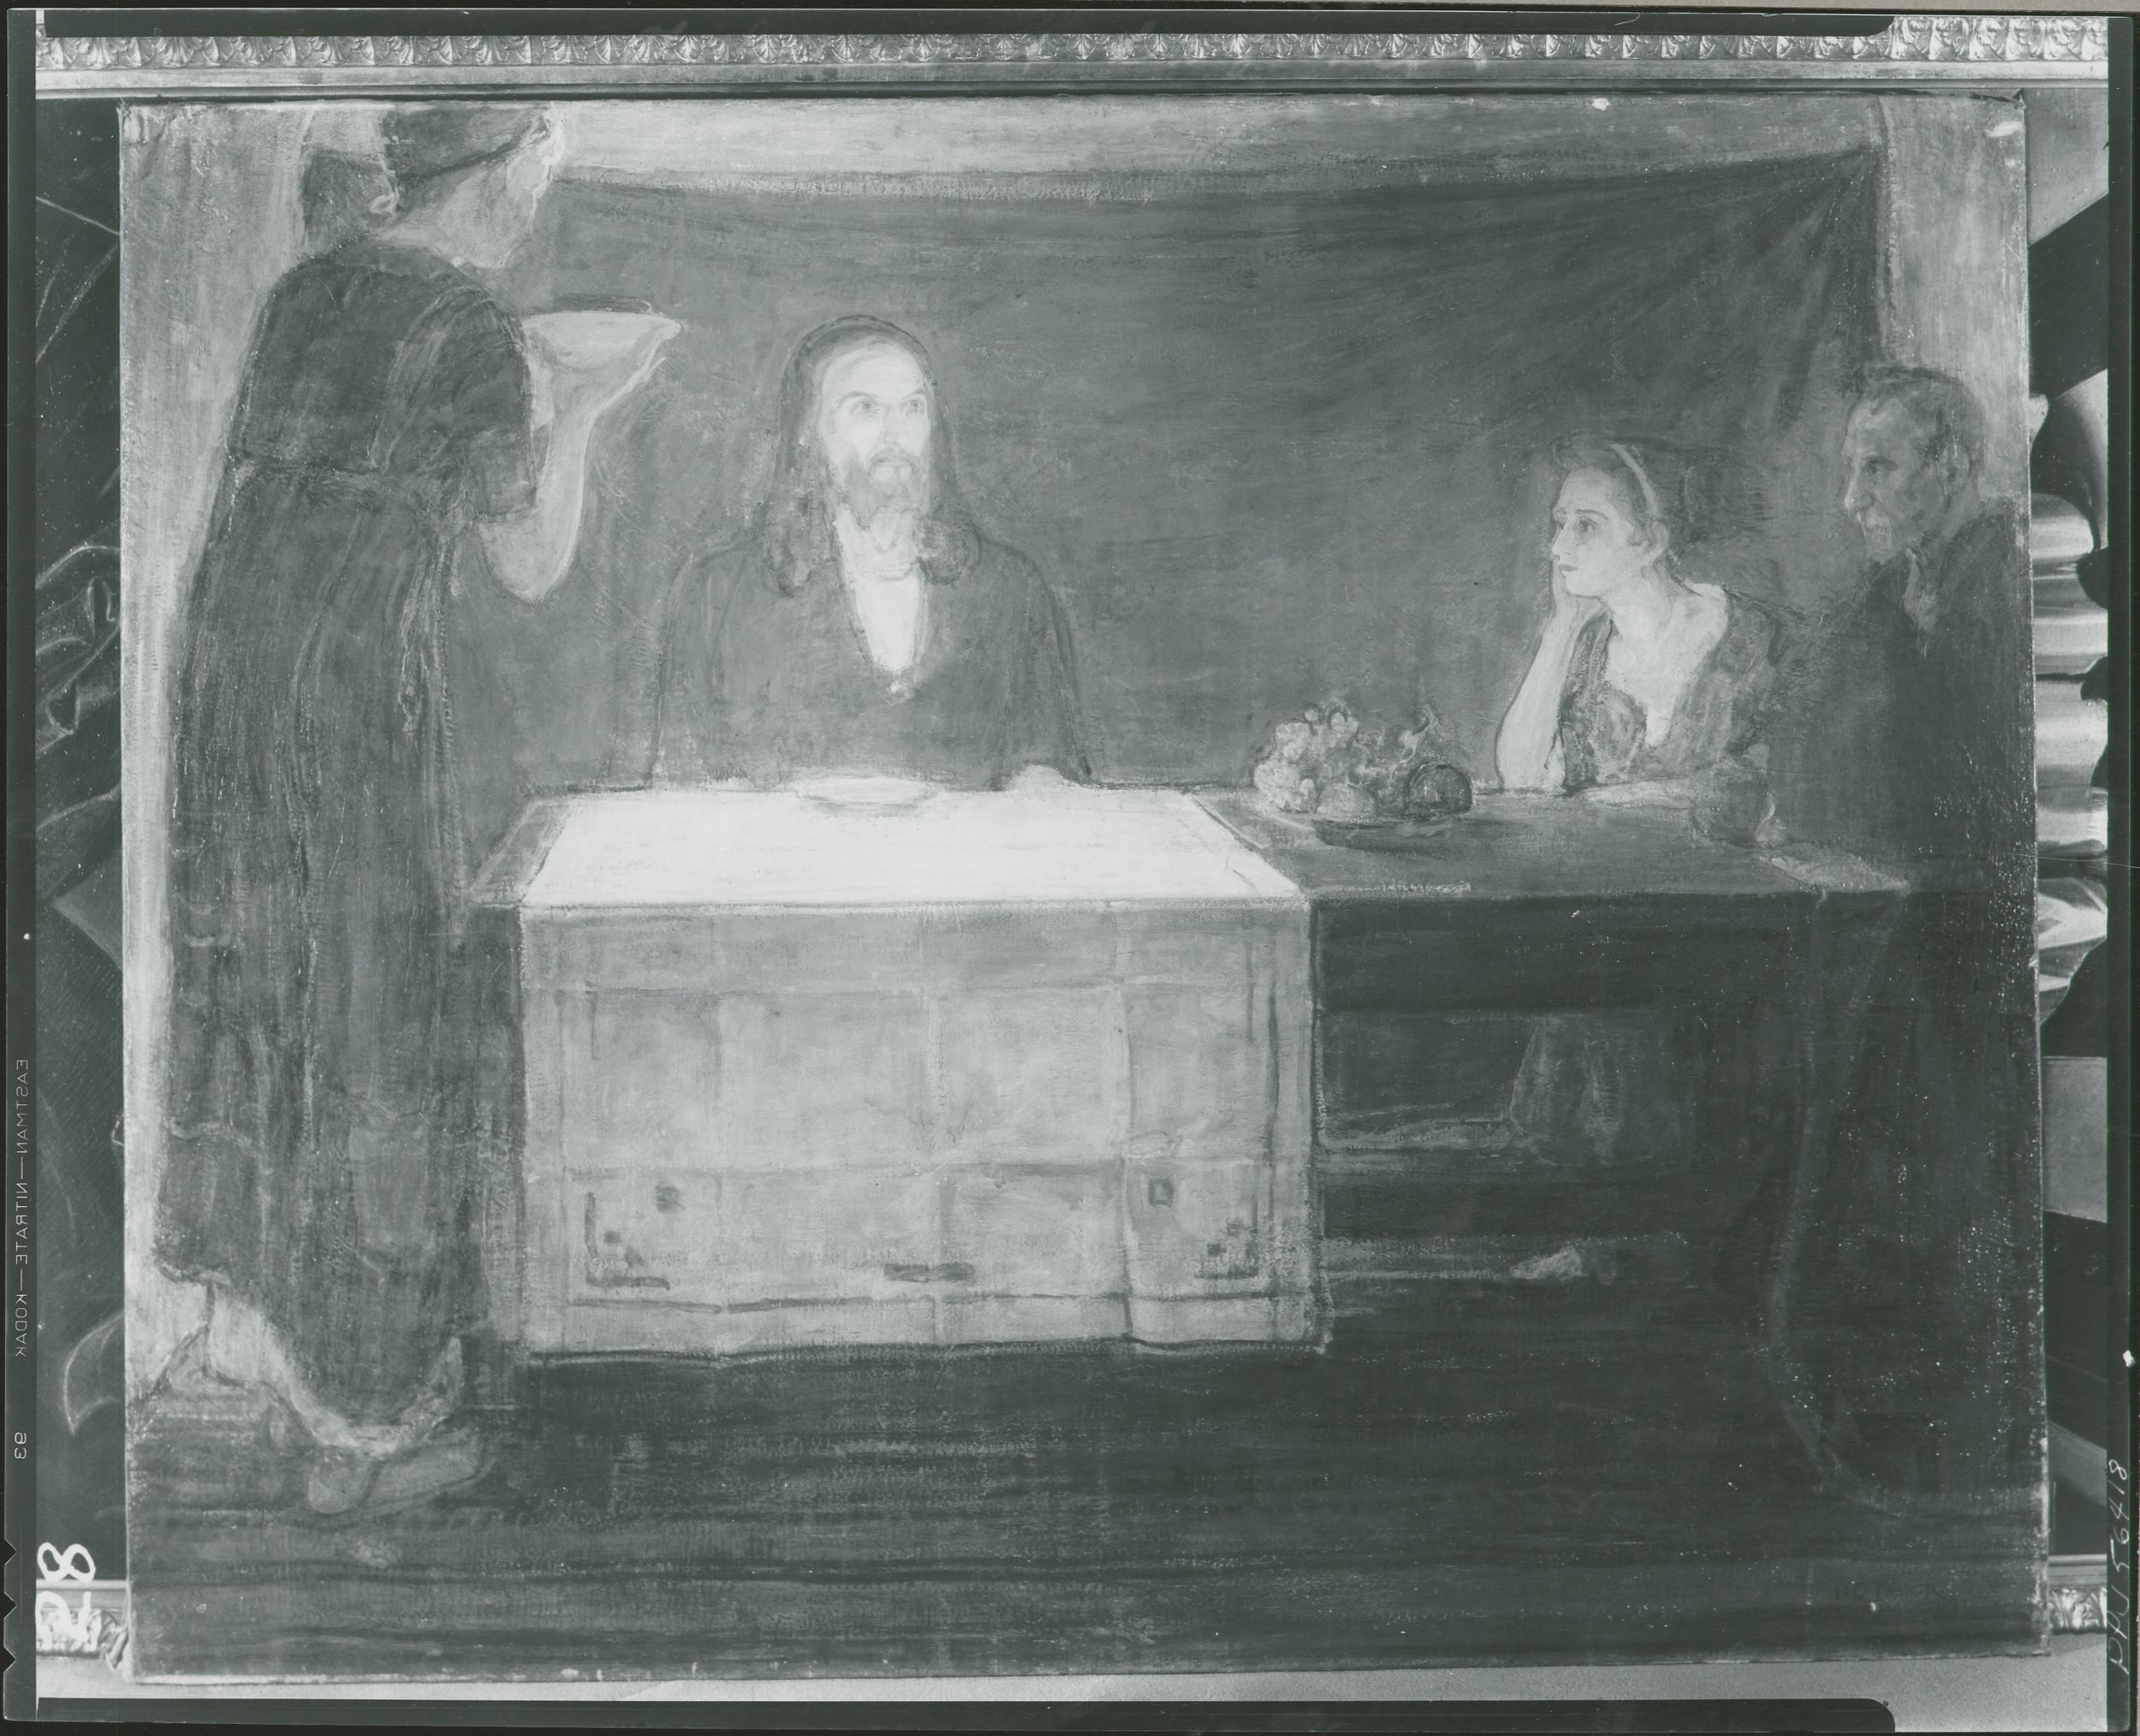 Black-and white photograph of an oil painting featuring four people seated at a table covered with a white cloth. In the center is a man, representing Christ, with both hands on the tabletop. To the right is a seated female figure with her head resting in one hand, accompanied by a male figure in dark clothing. To the left is a standing female figure holding something on a plate.